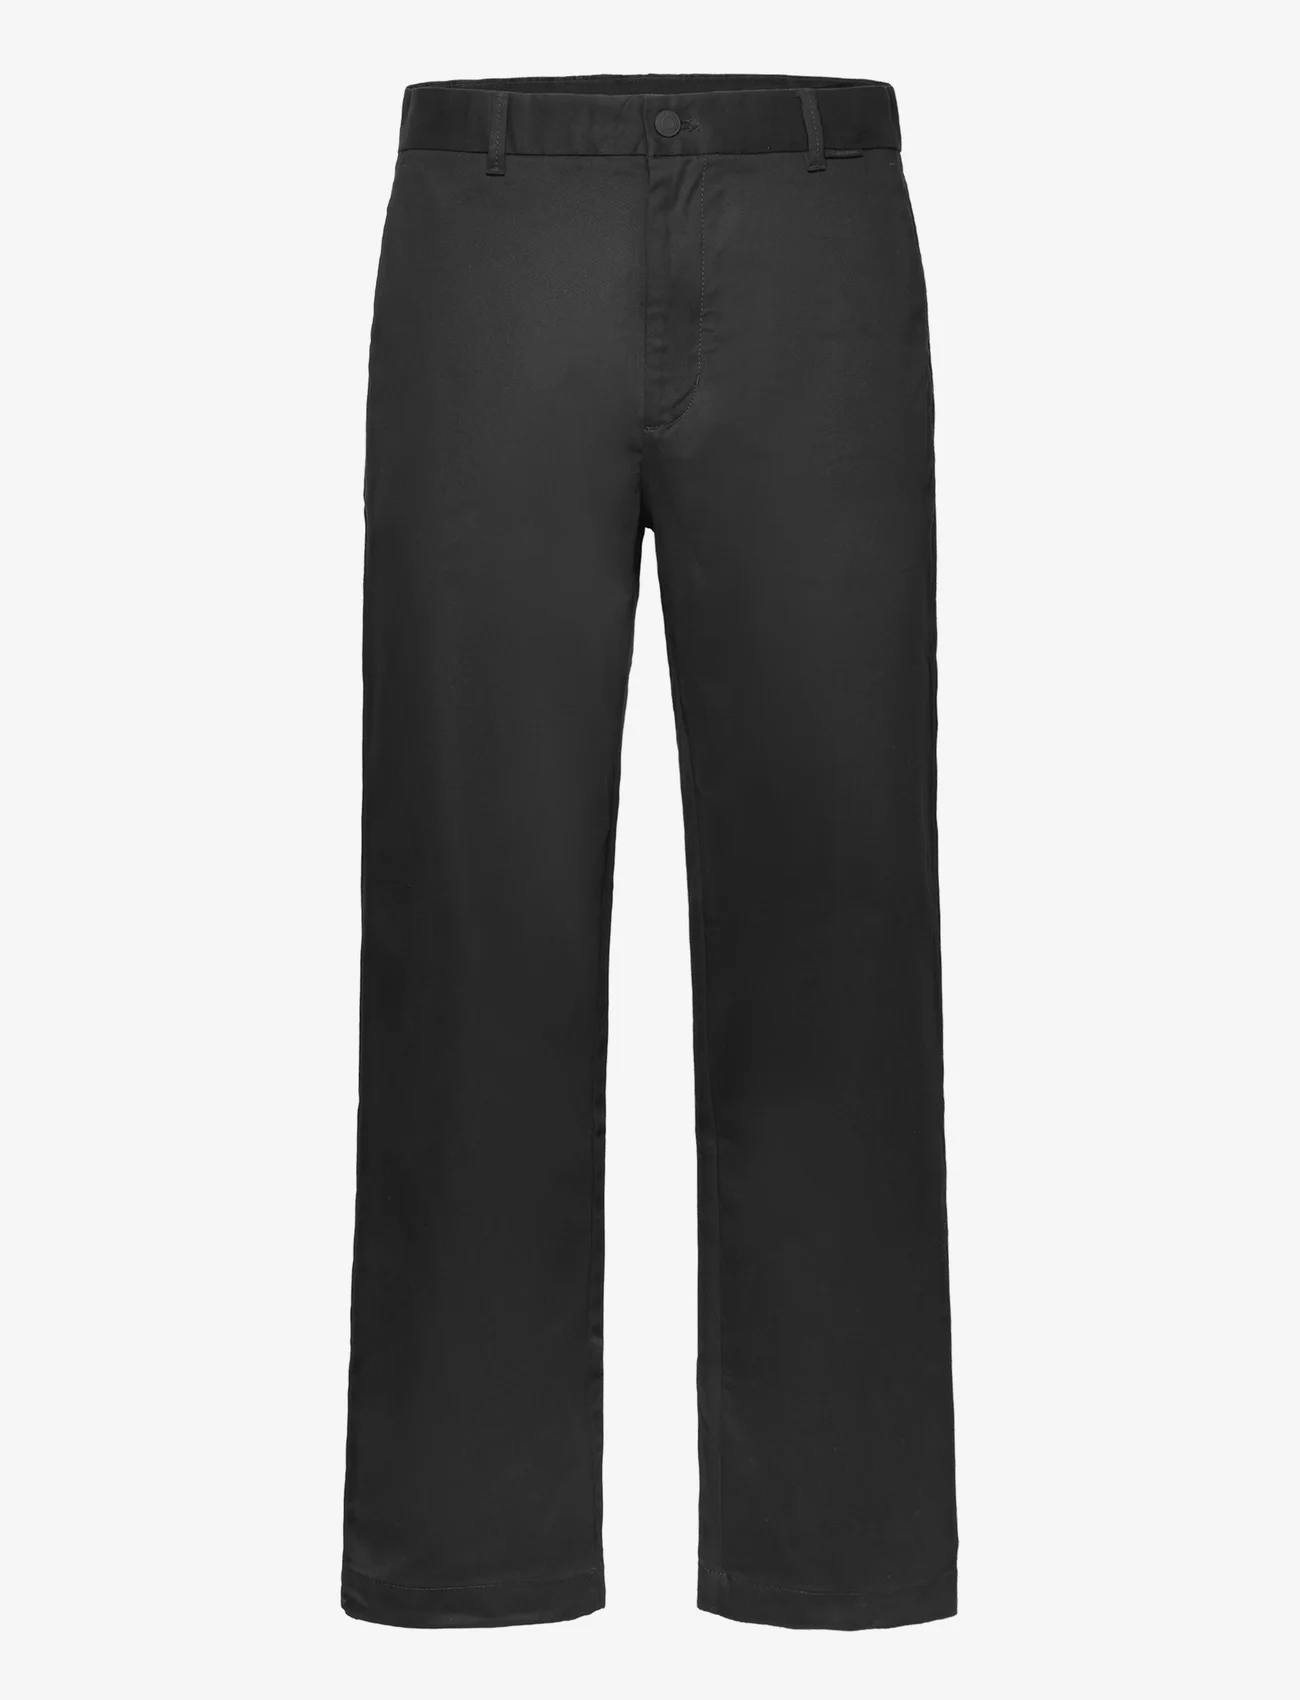 Calvin Klein - MODERN TWILL RELAXED PANTS - chinos - ck black - 0